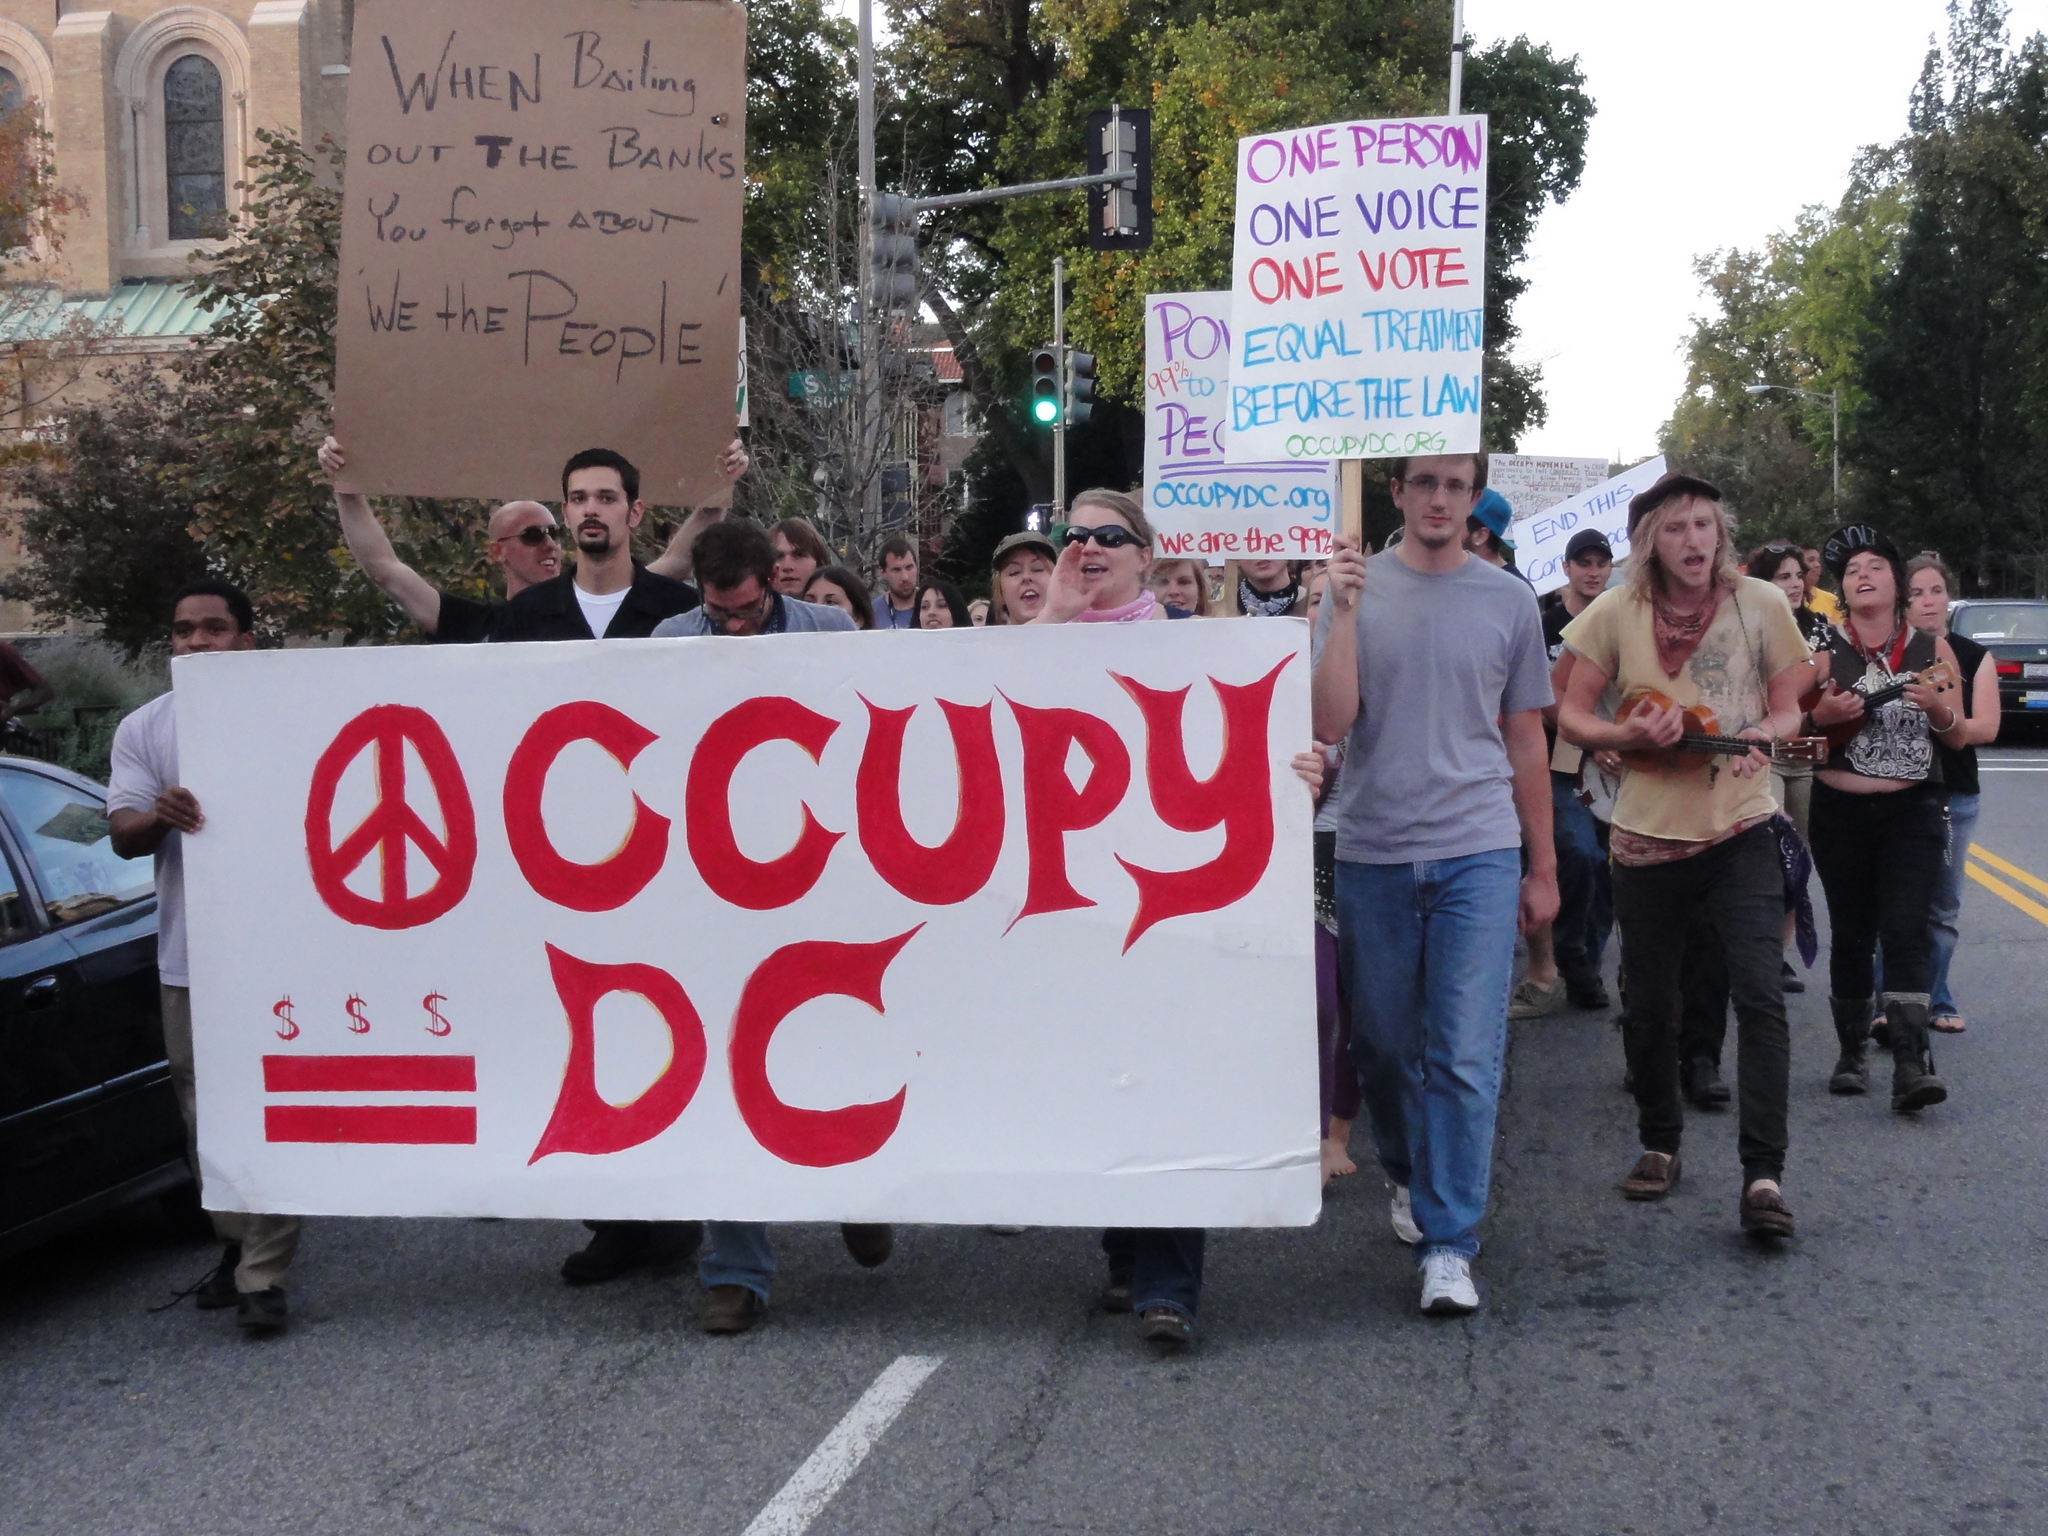 Occupy movement in the United States